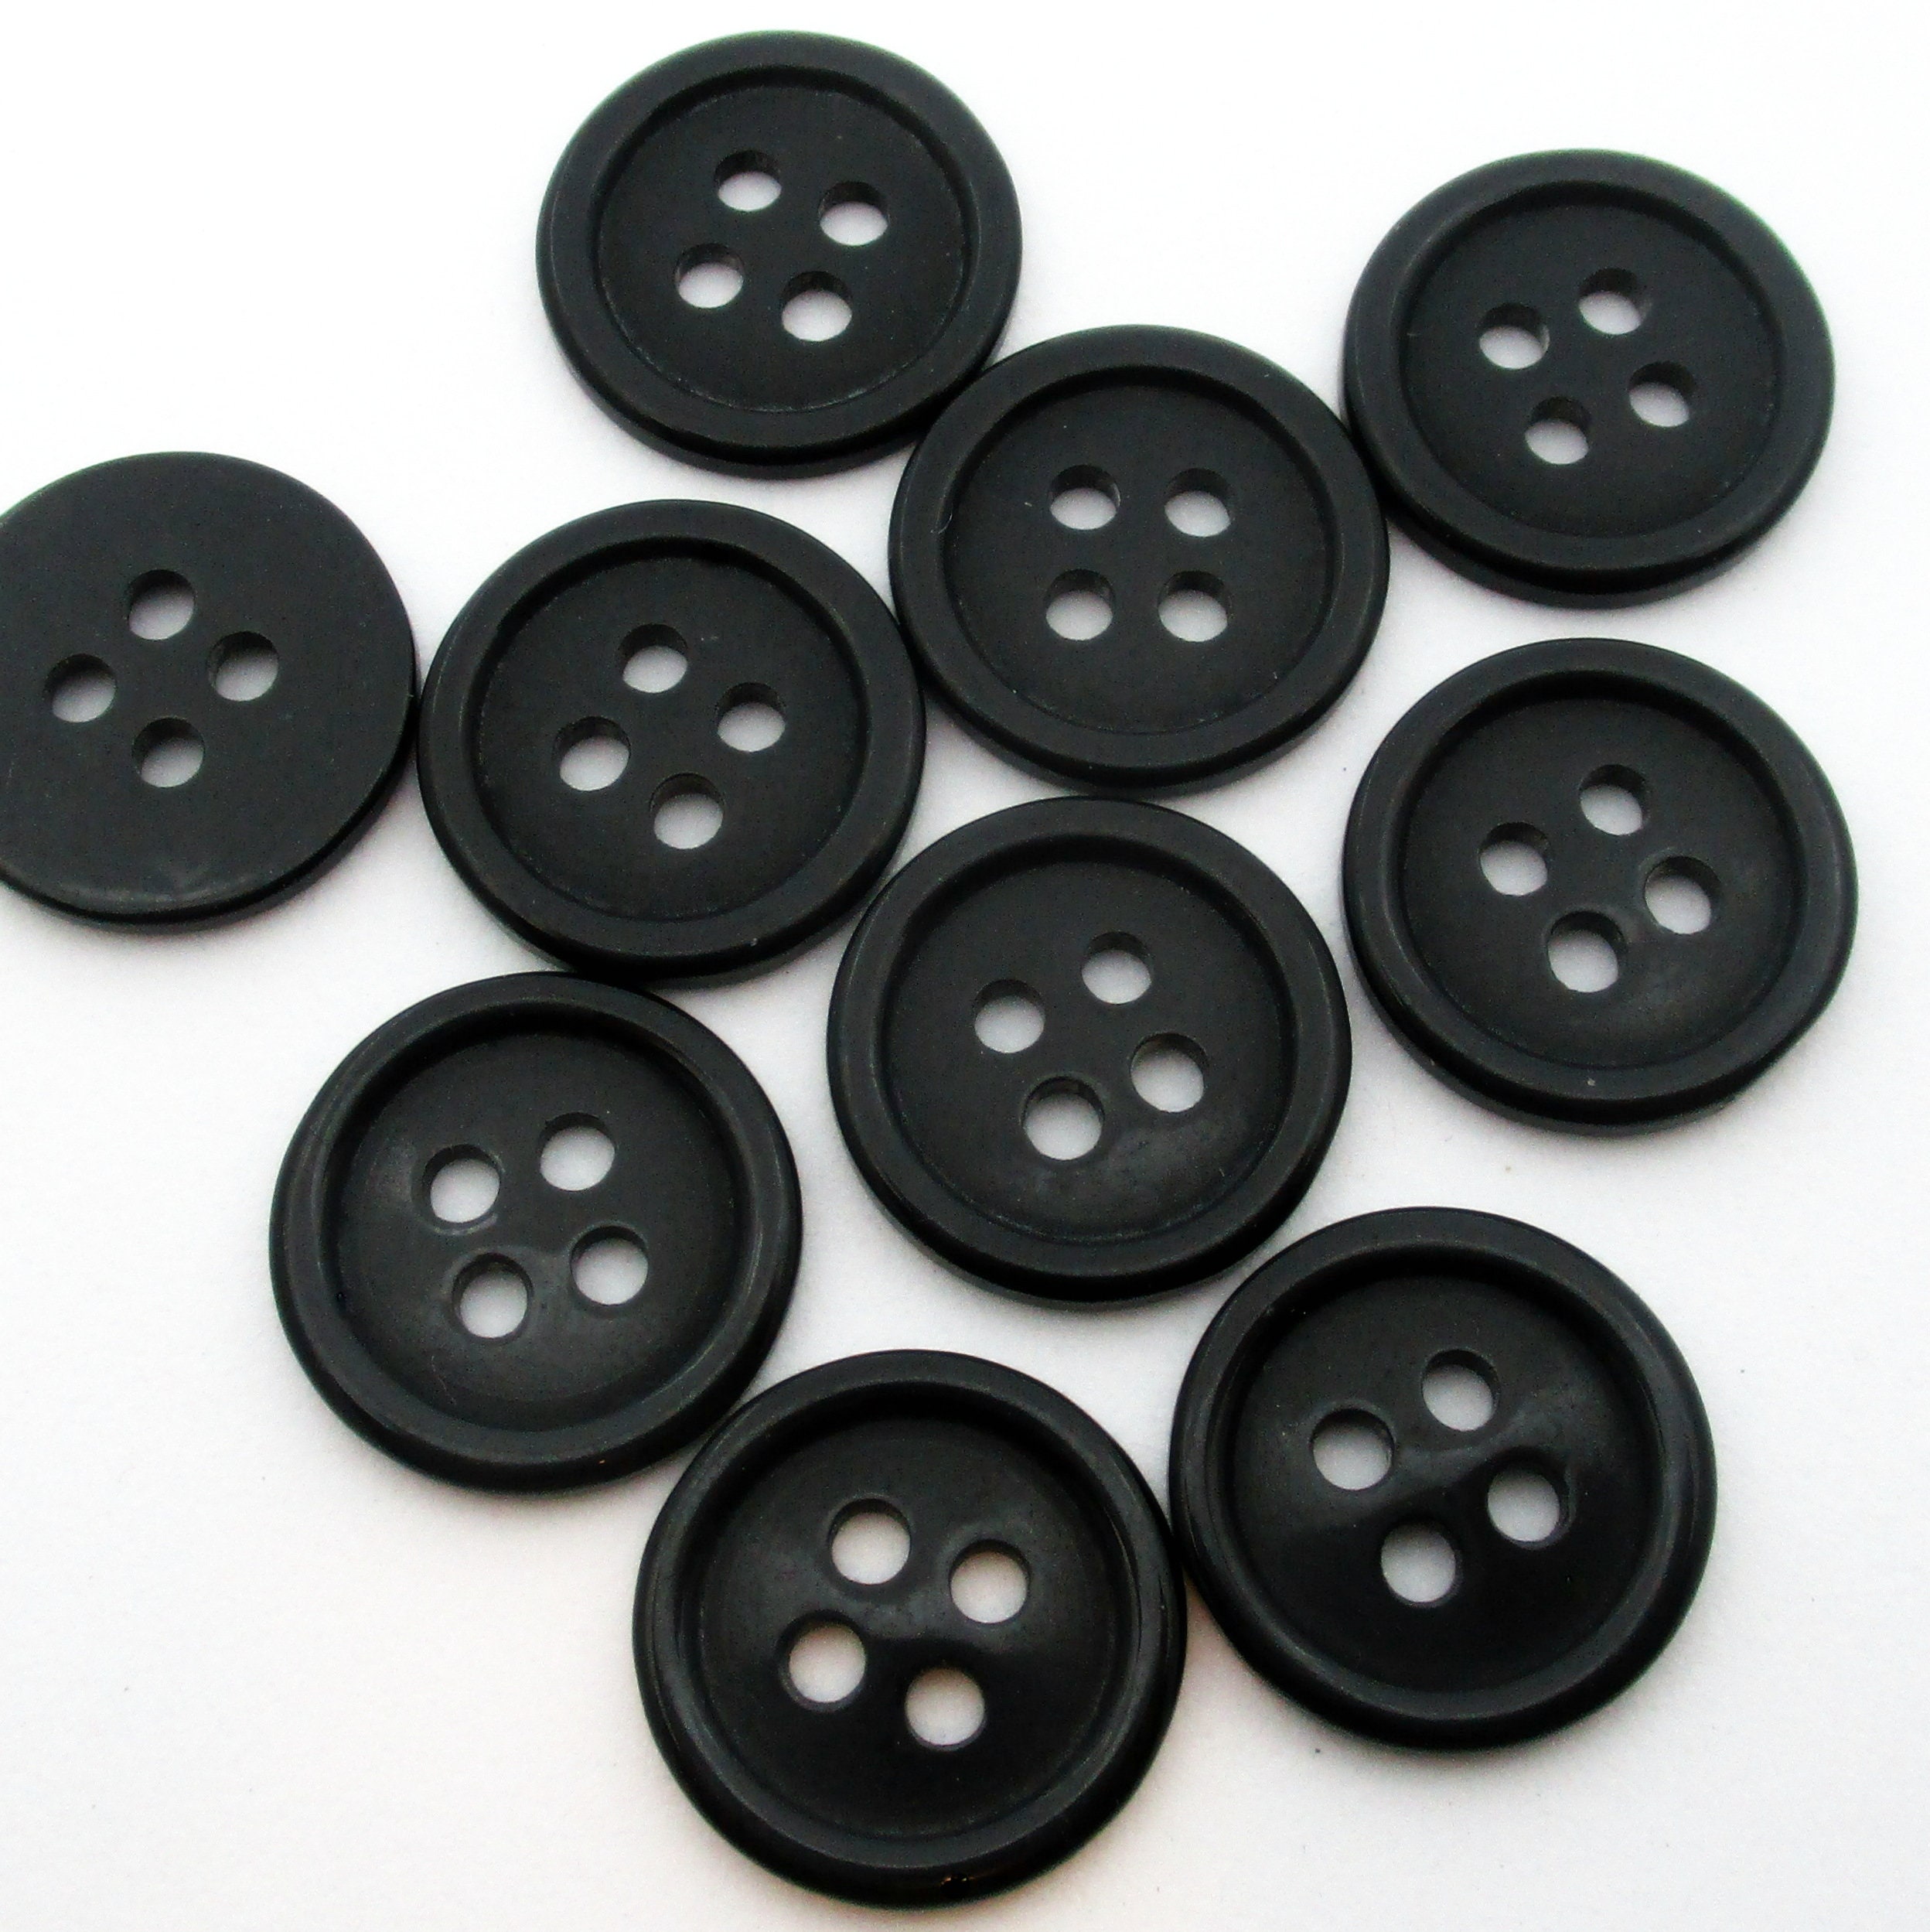 50 Black 15mm Resin Buttons 15mm Buttons Four Hole Buttons | Etsy